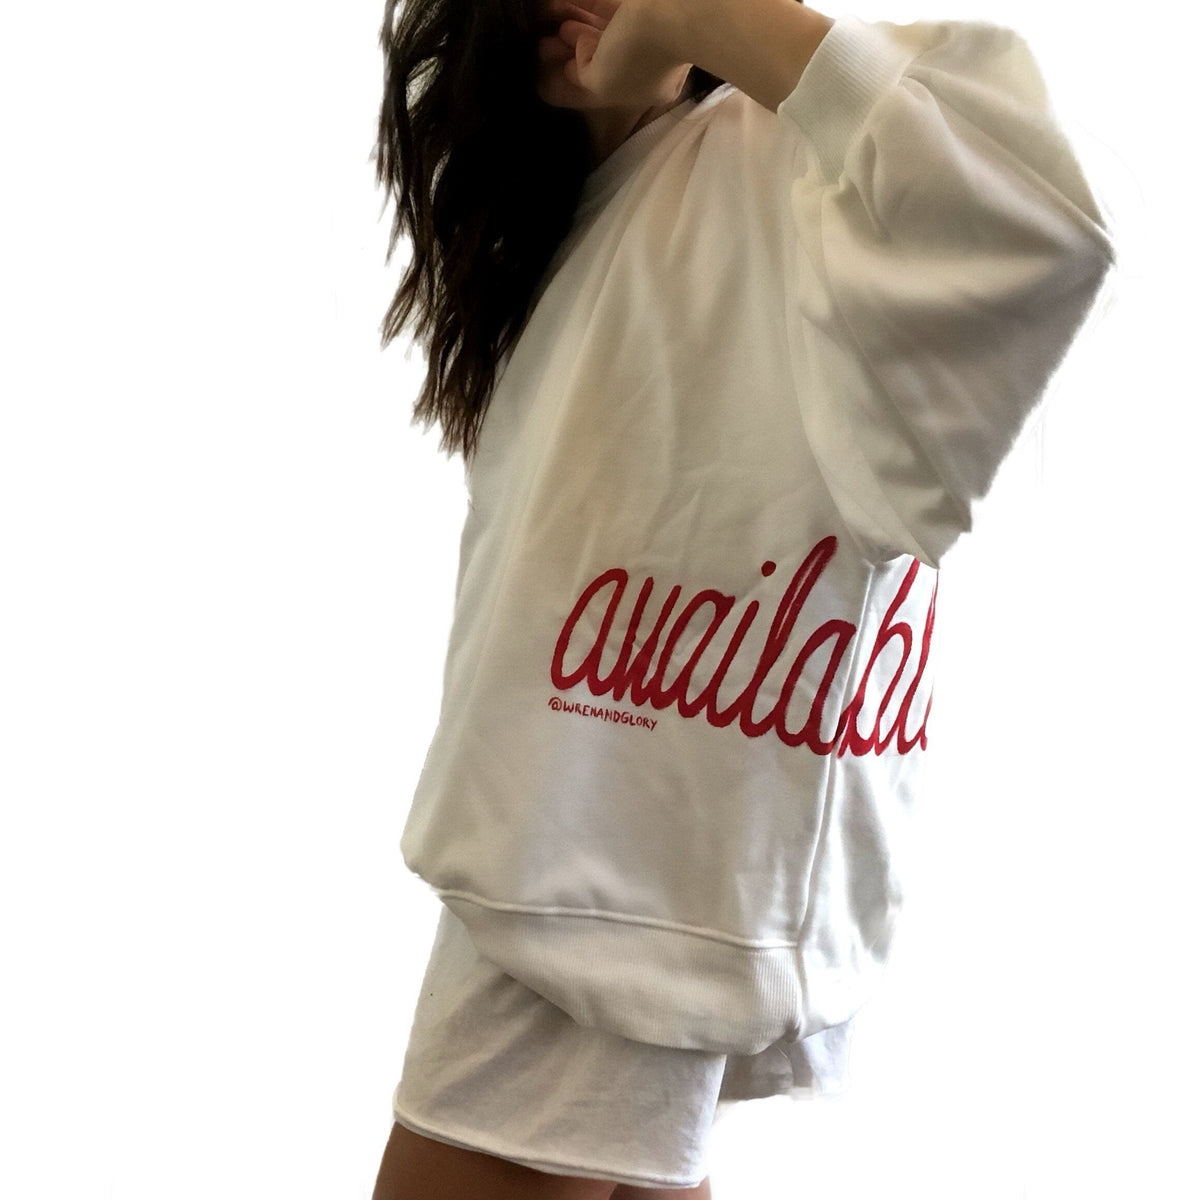 Oversized white sweatshirt. 'Available' painted in script on lower left side, in red. Small red embroidered heart on each lower sleeve. Signed @wrenandglory.